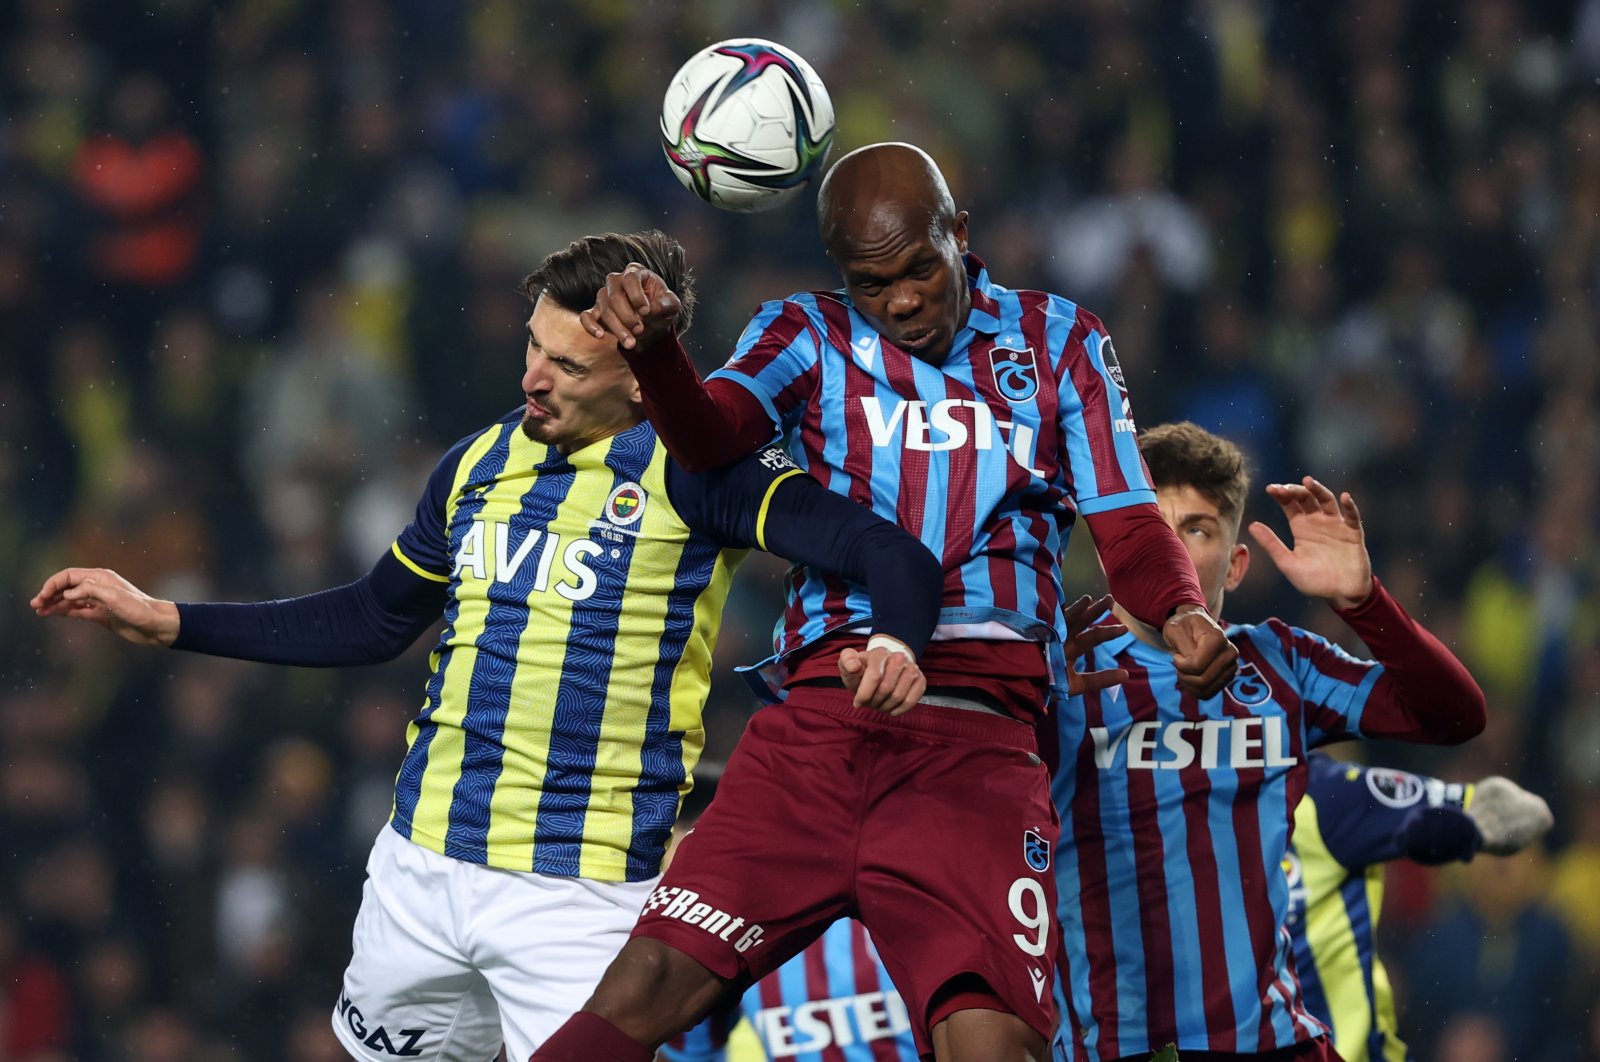 Fenerbahçe forward Mergim Berisha (L) and Anthony Nwakaeme (R) attempt to head the ball, during a Süper Lig match between Fenerbahçe and Trabzonspor at the Ülker Stadium, in Istanbul, Turkey, March 6, 2022. (AA Photo)